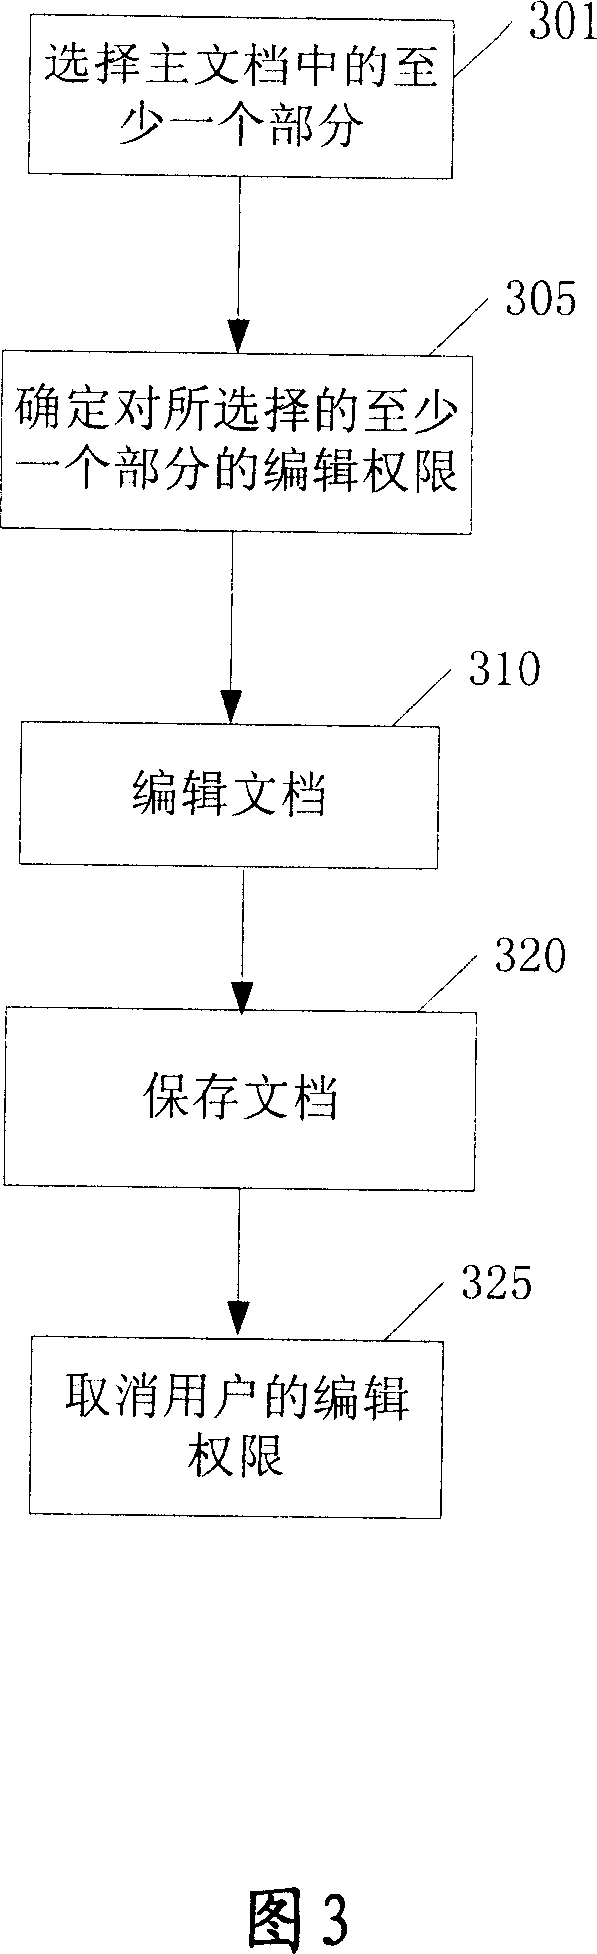 Method and device for allowing multi-users to edit a shared electronic file simultaneously